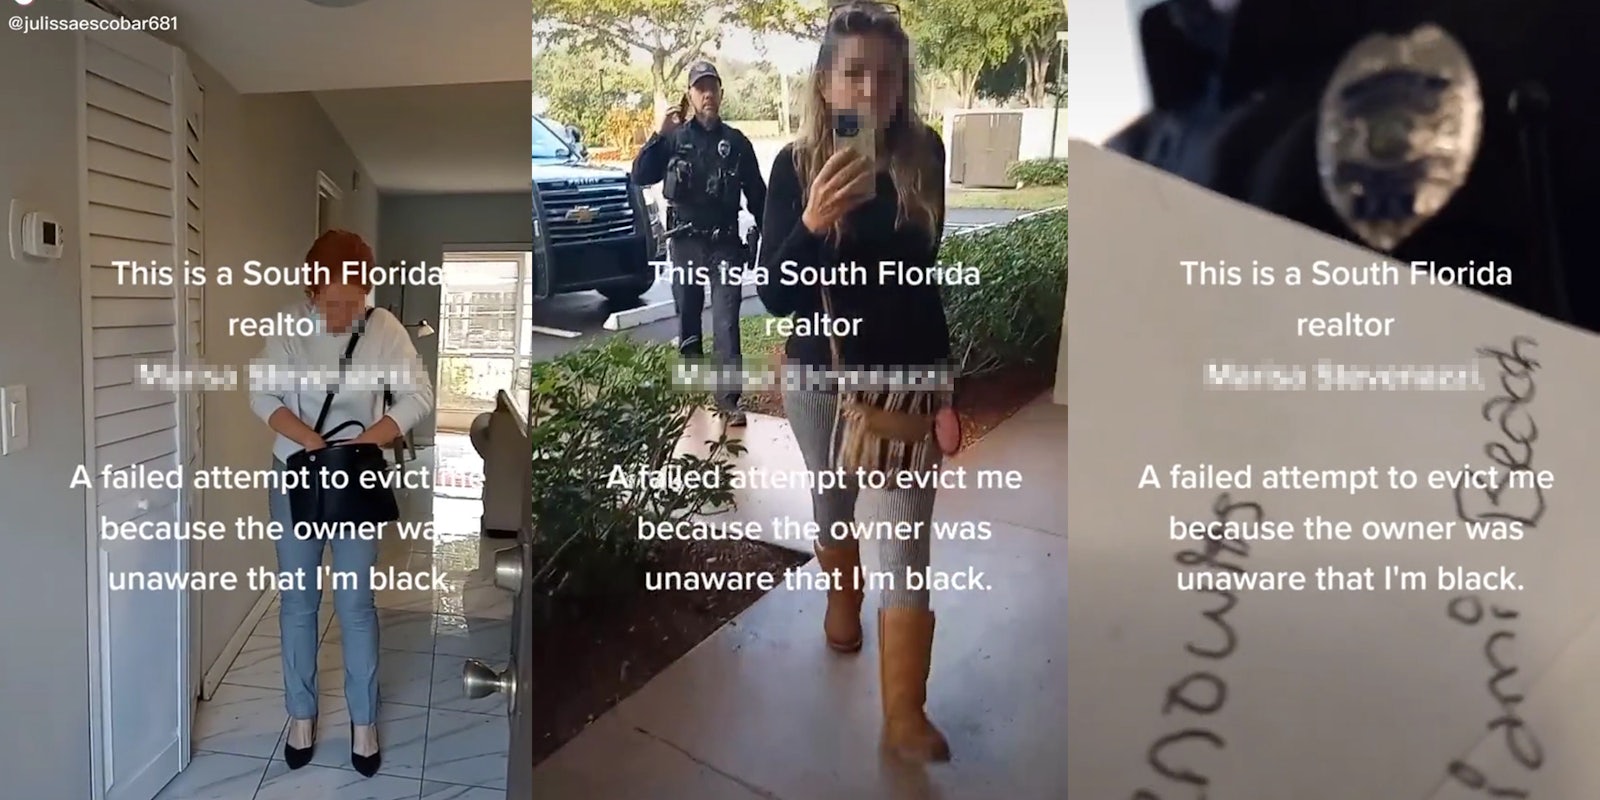 police escorting woman with caption 'this is a south florida realtor - a failed attempt to evict because the owner was unaware that i'm black'